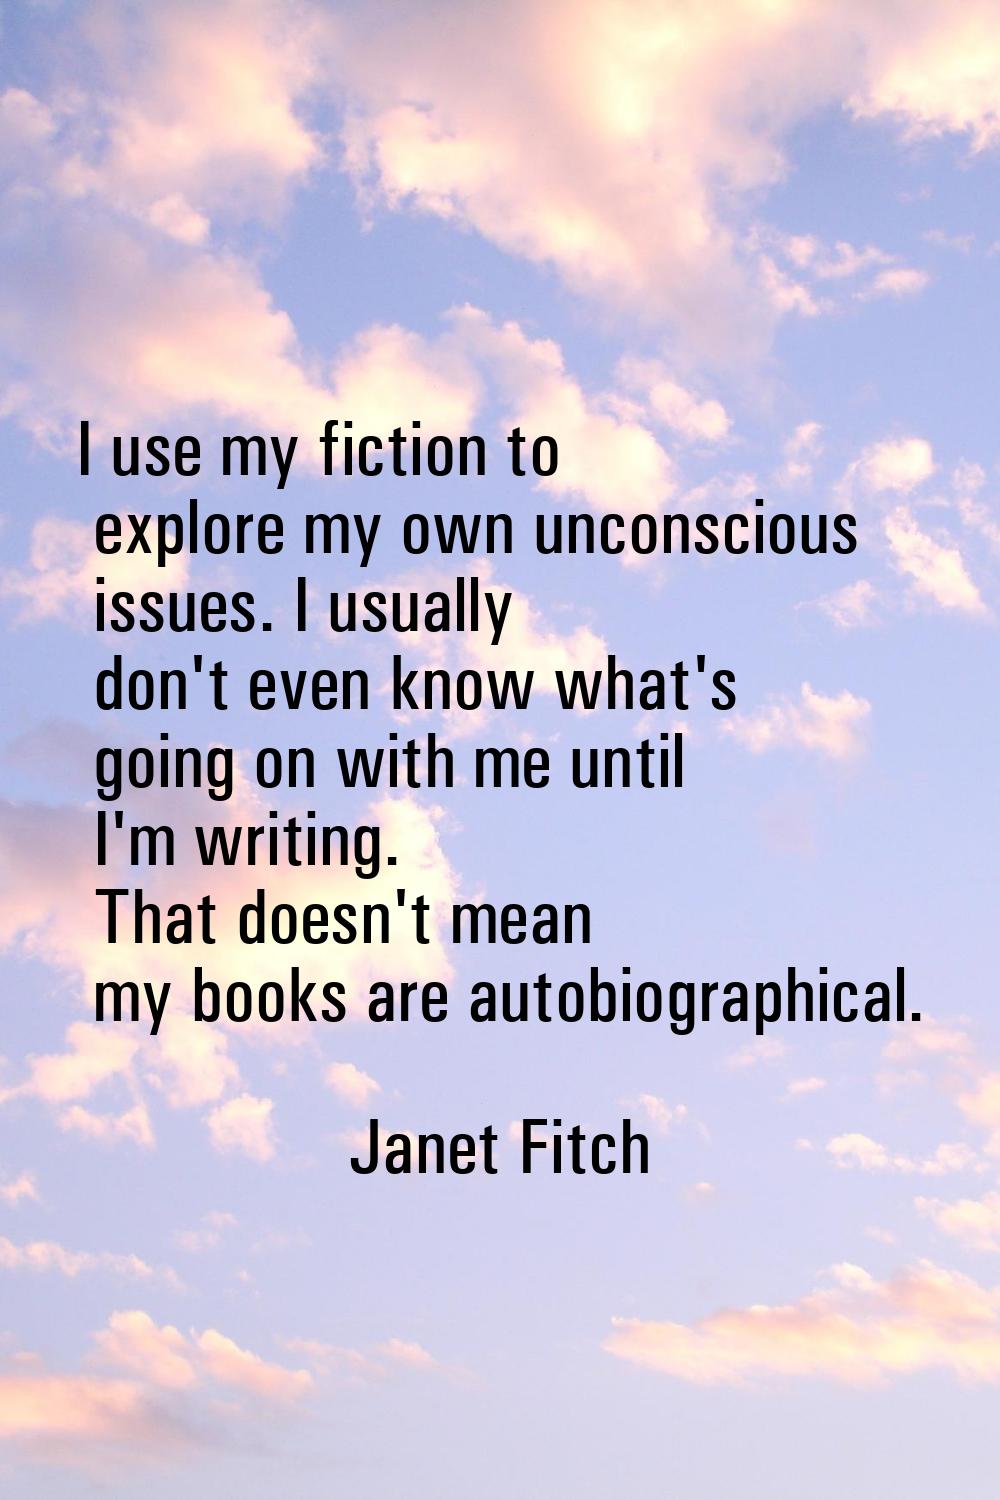 I use my fiction to explore my own unconscious issues. I usually don't even know what's going on wi